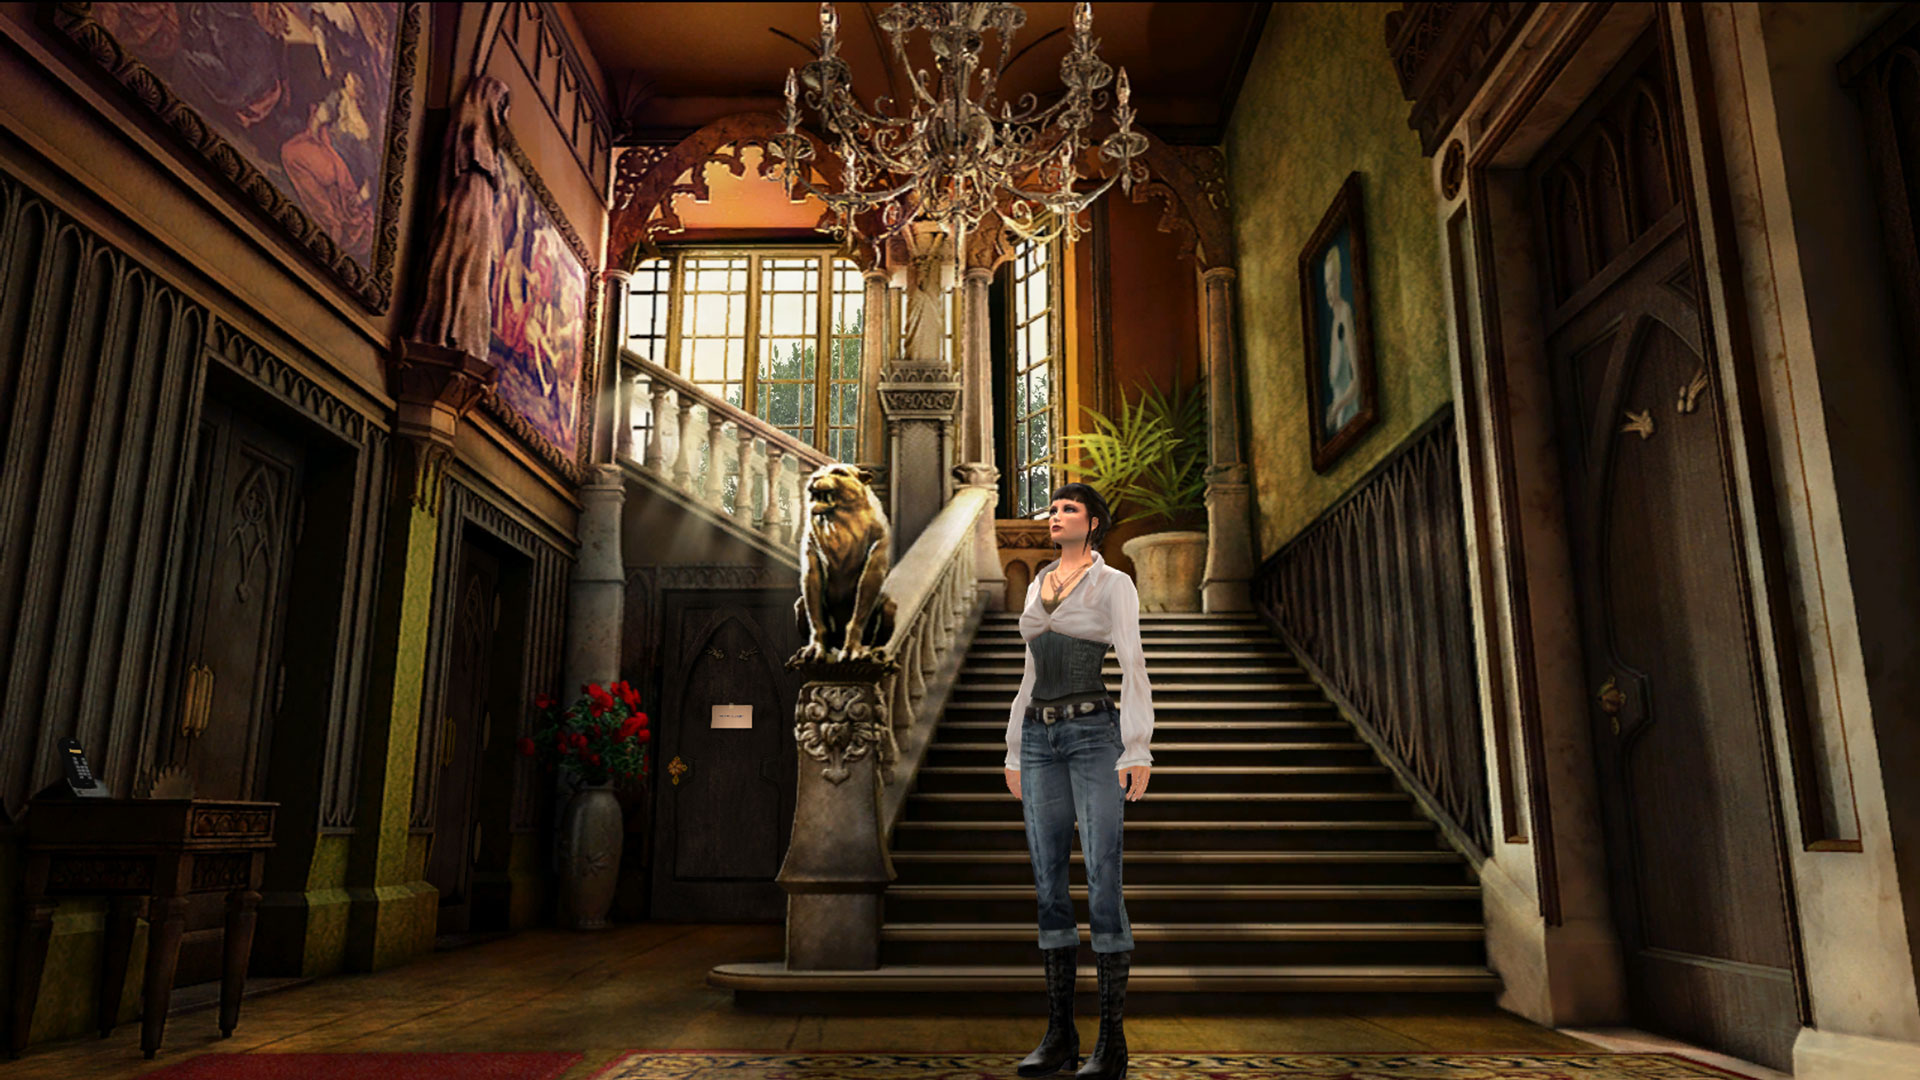 Entrance hall of Dread Hill House, Oxford, in Gray Matter adventure game screenshot | Inky Squiggles